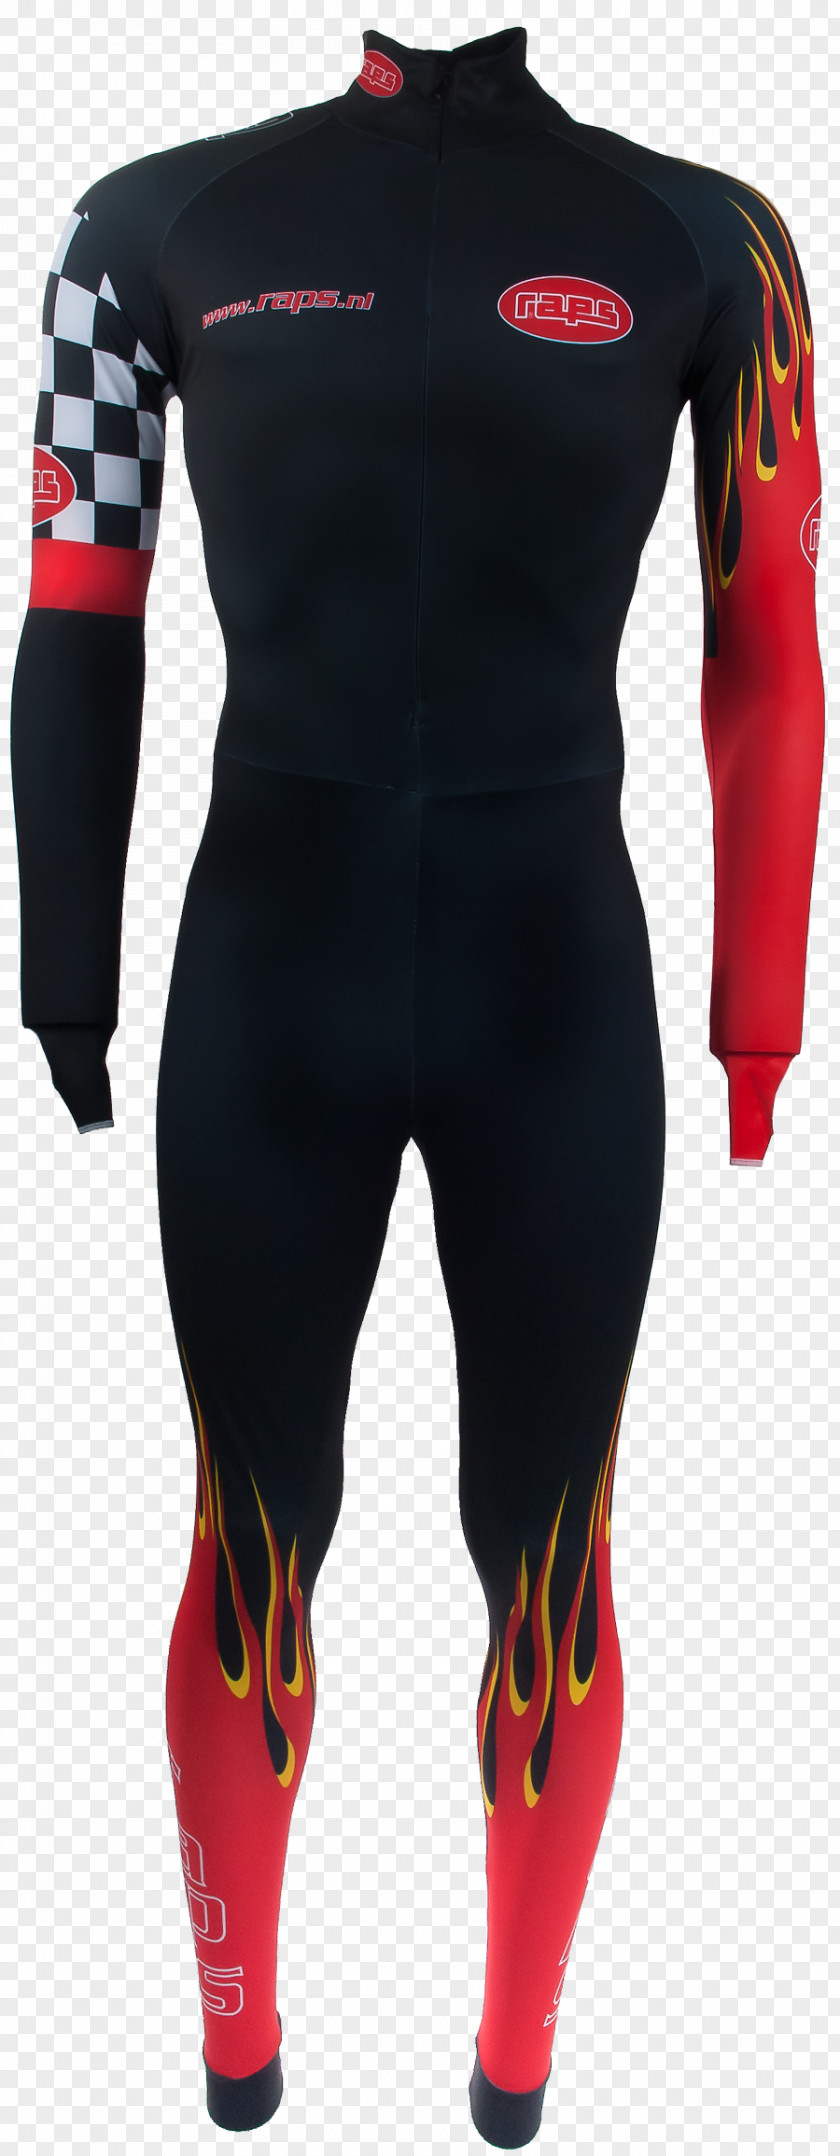 Ice Skating Wetsuit PNG